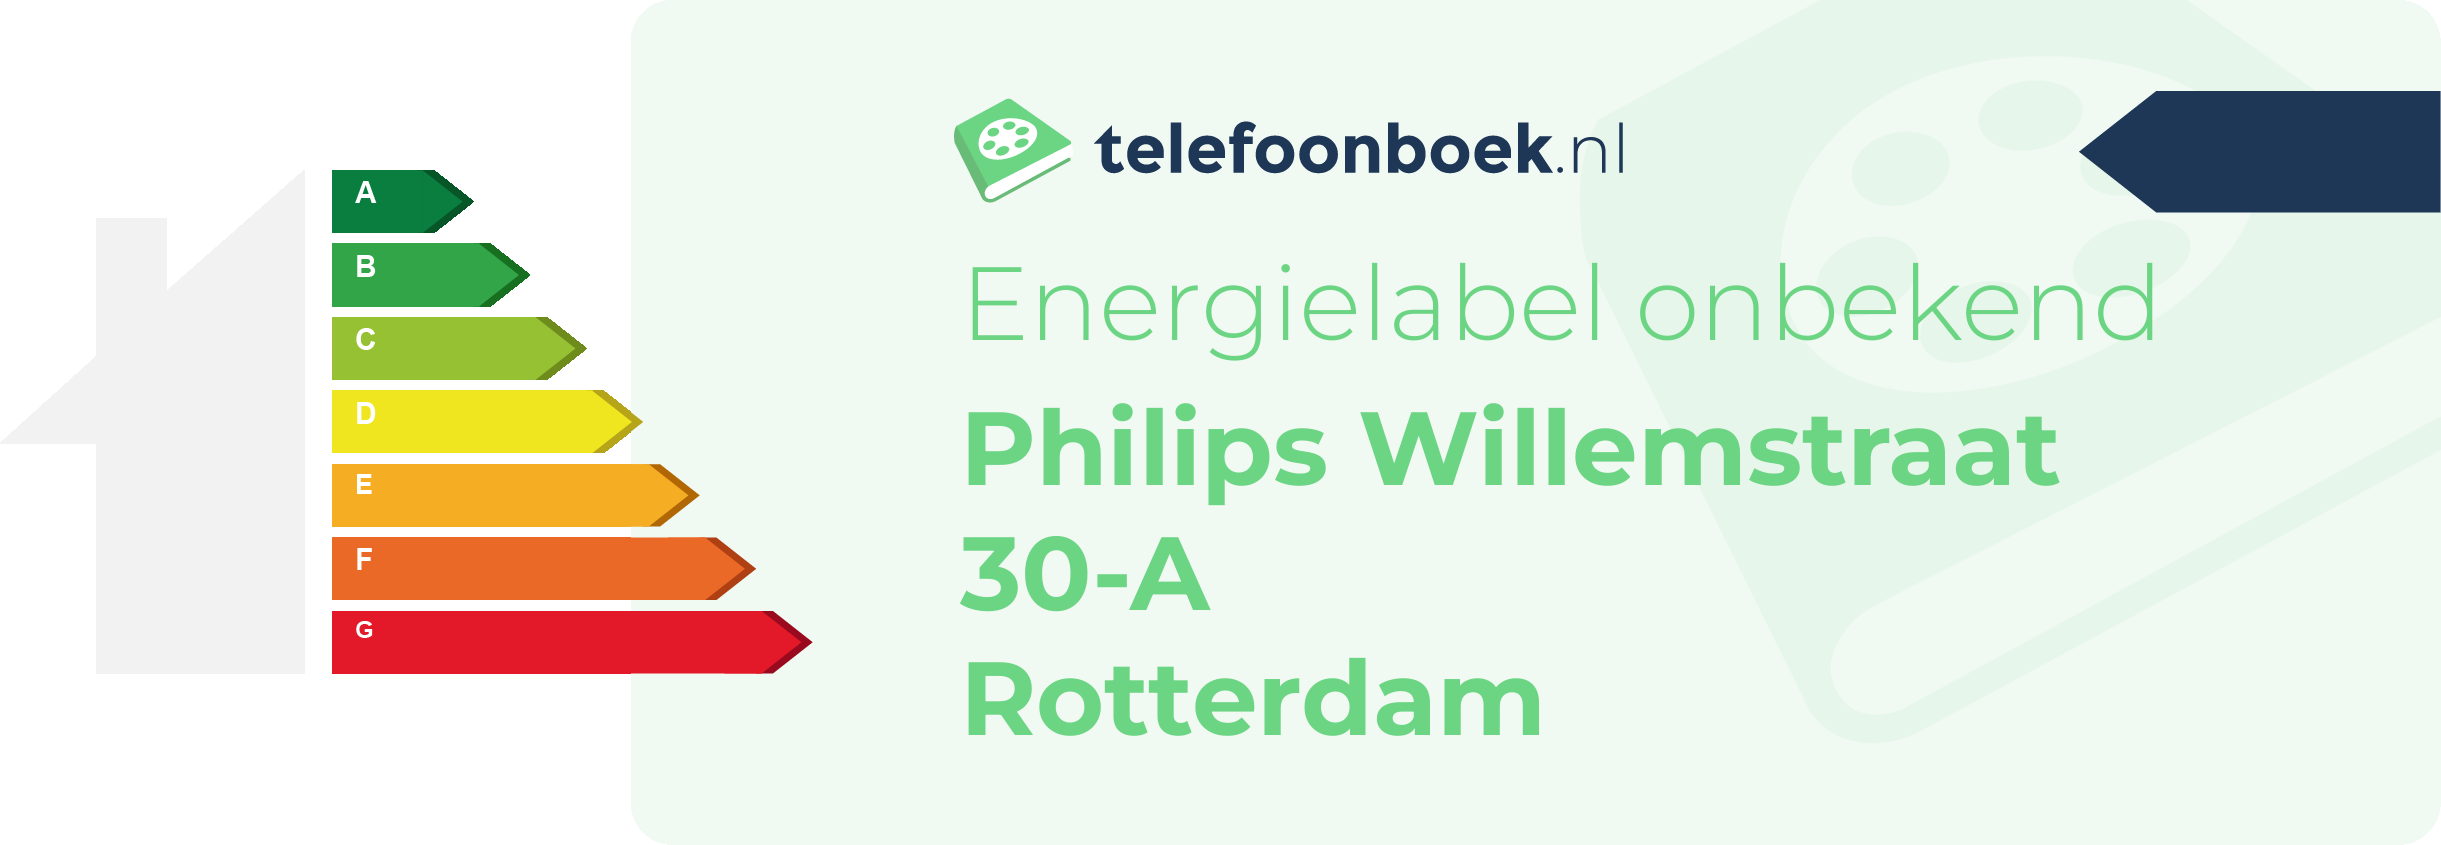 Energielabel Philips Willemstraat 30-A Rotterdam